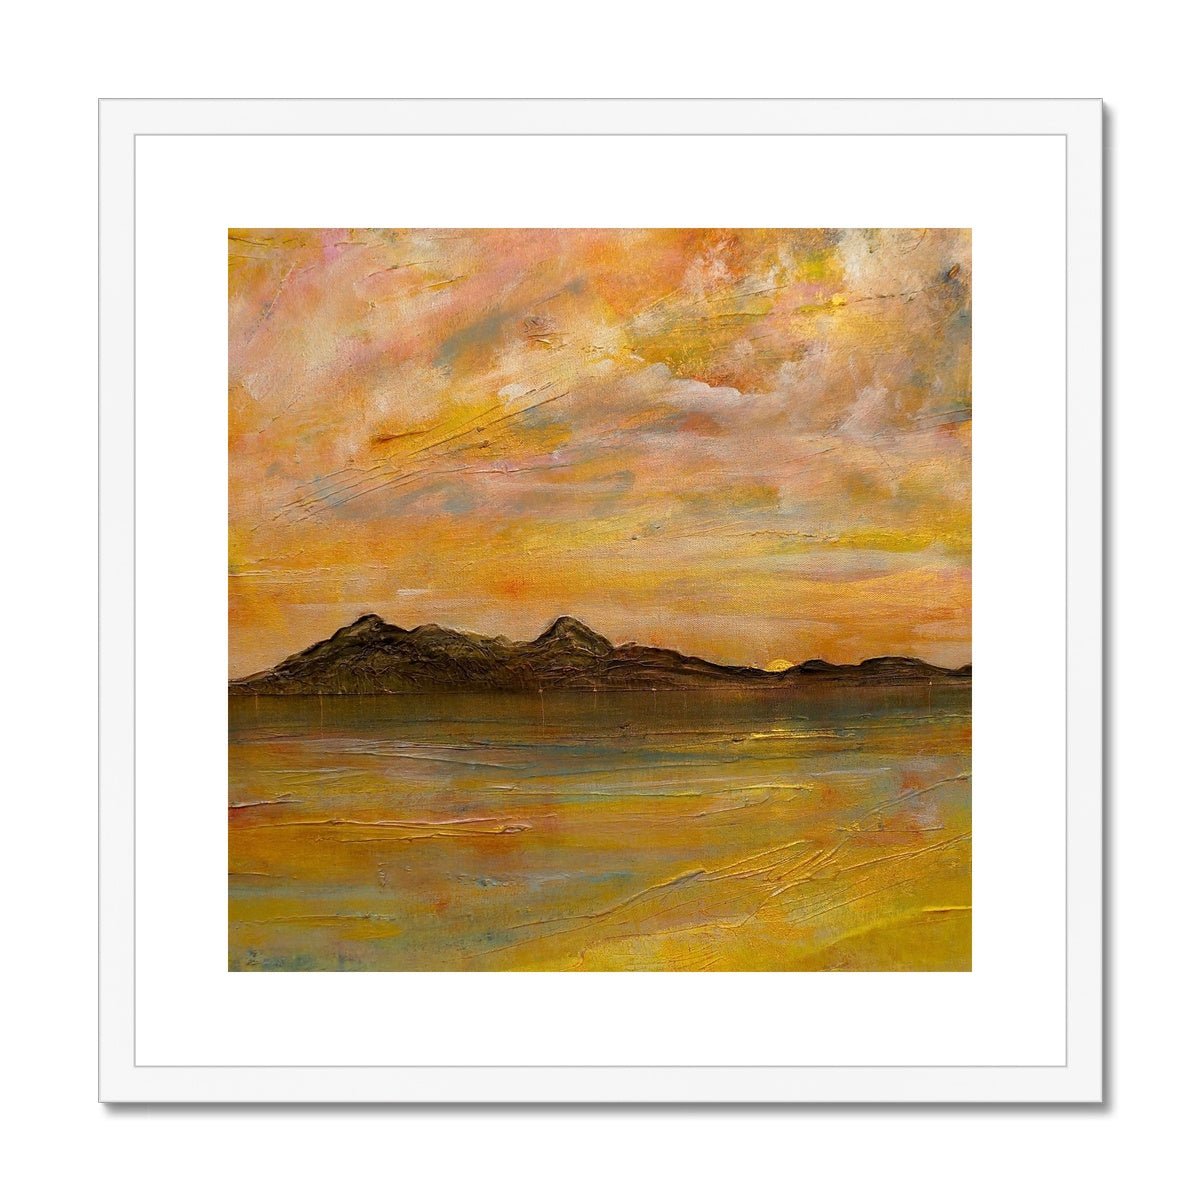 Arran Dusk Painting | Framed & Mounted Prints From Scotland-Framed & Mounted Prints-Arran Art Gallery-20"x20"-White Frame-Paintings, Prints, Homeware, Art Gifts From Scotland By Scottish Artist Kevin Hunter